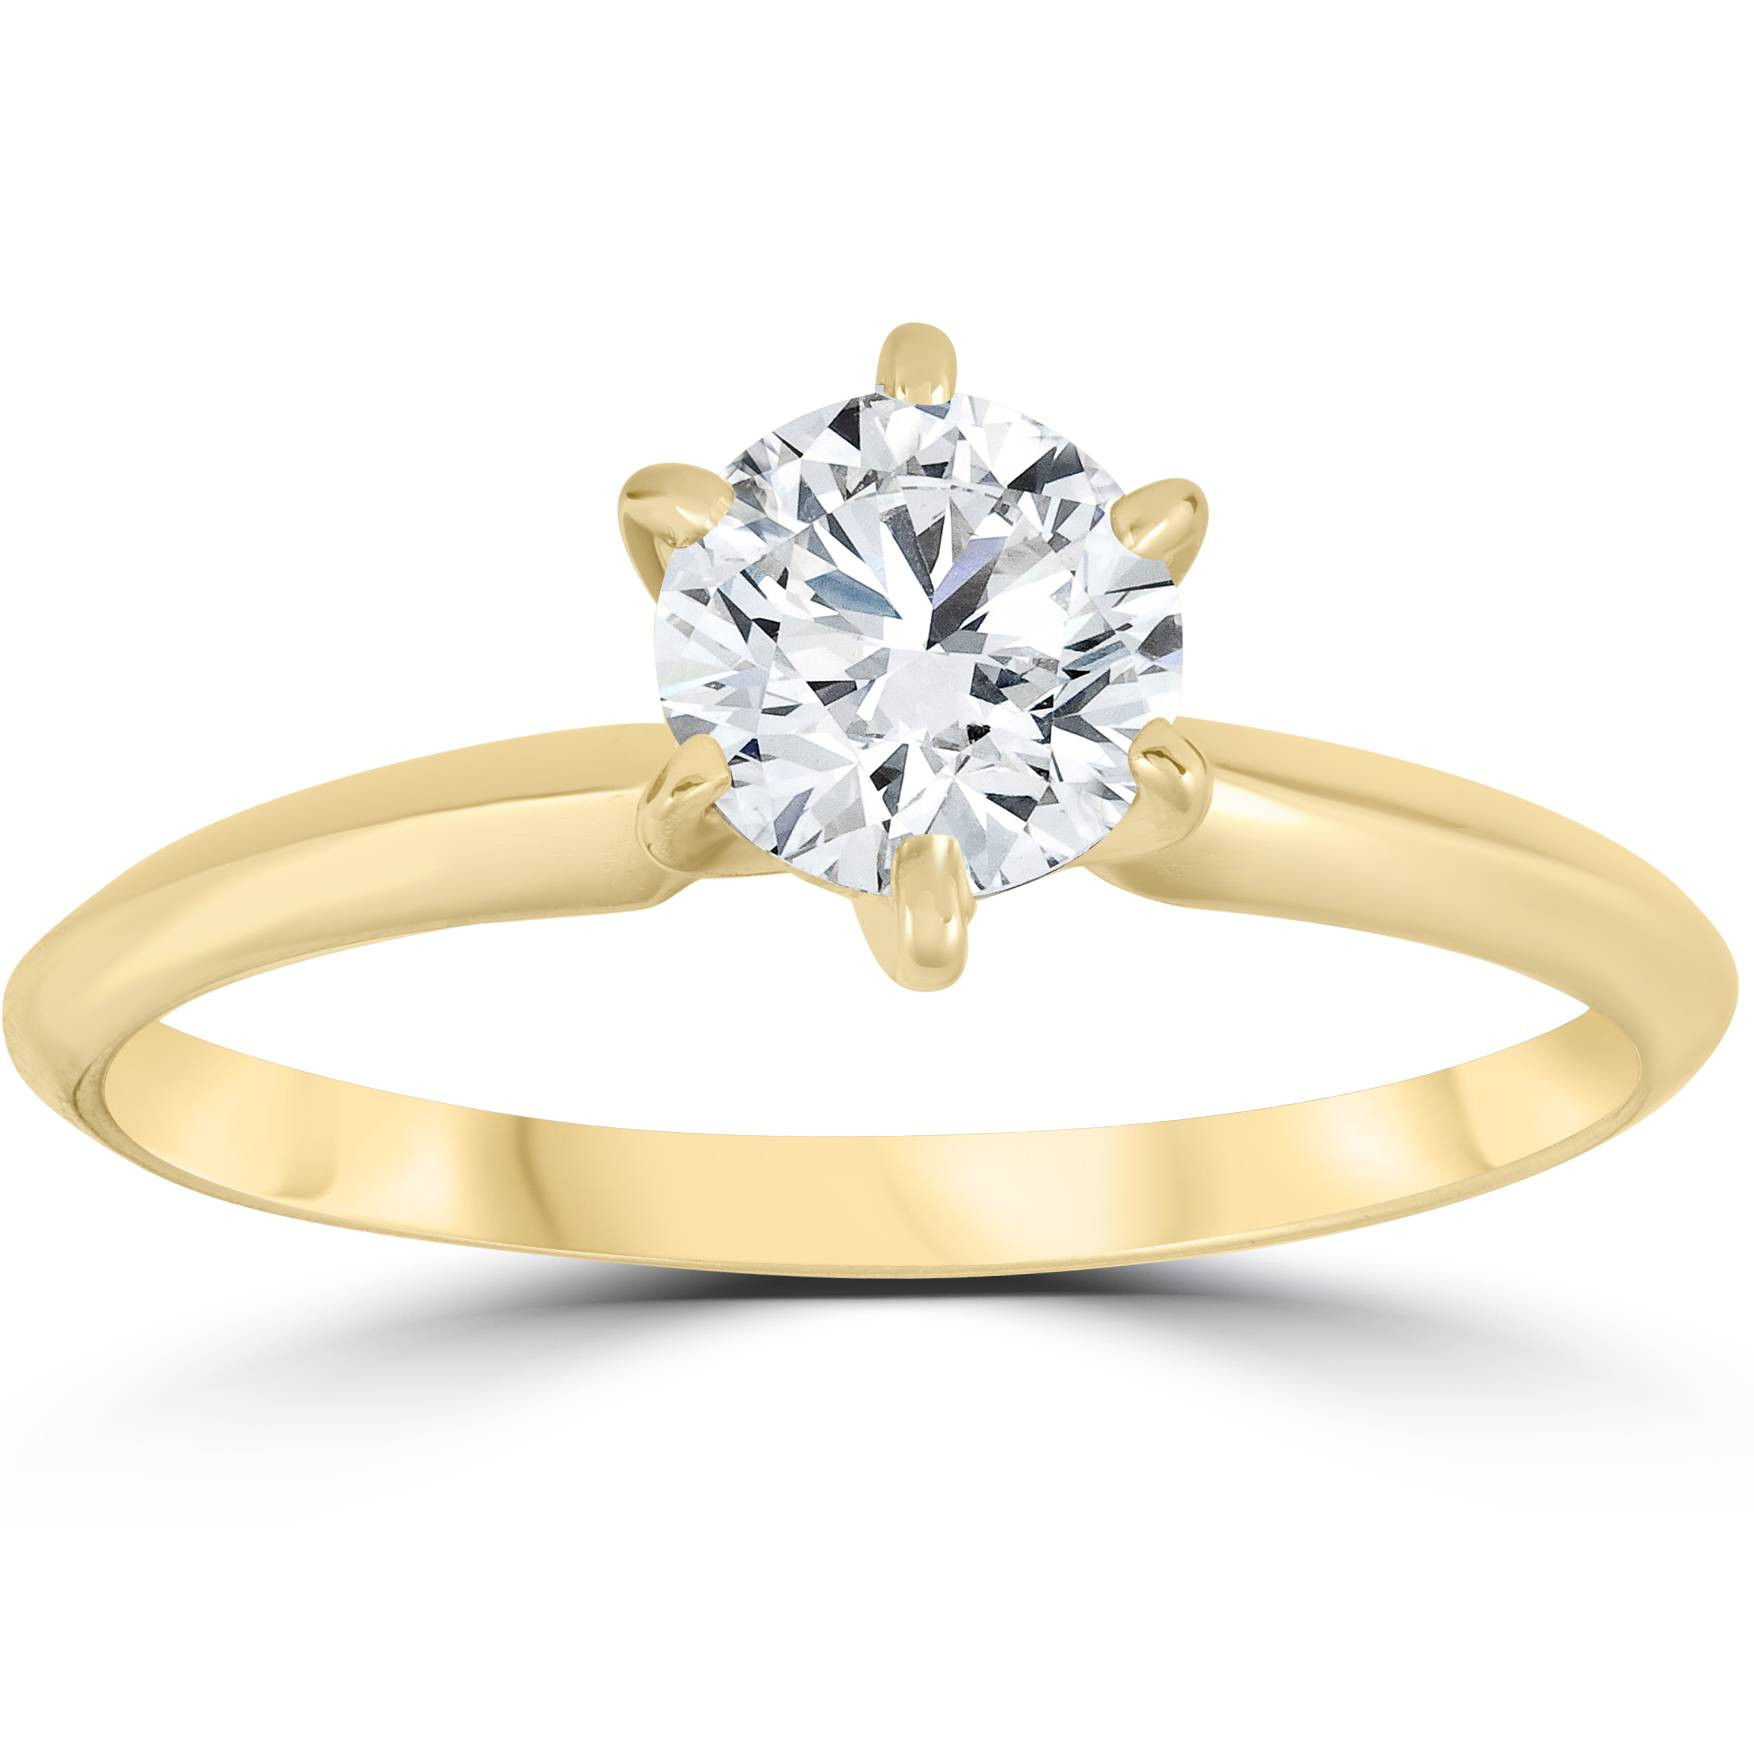 Solitaire Diamond Rings
 14k Yellow Gold 3 4ct Round Solitaire Diamond Engagement